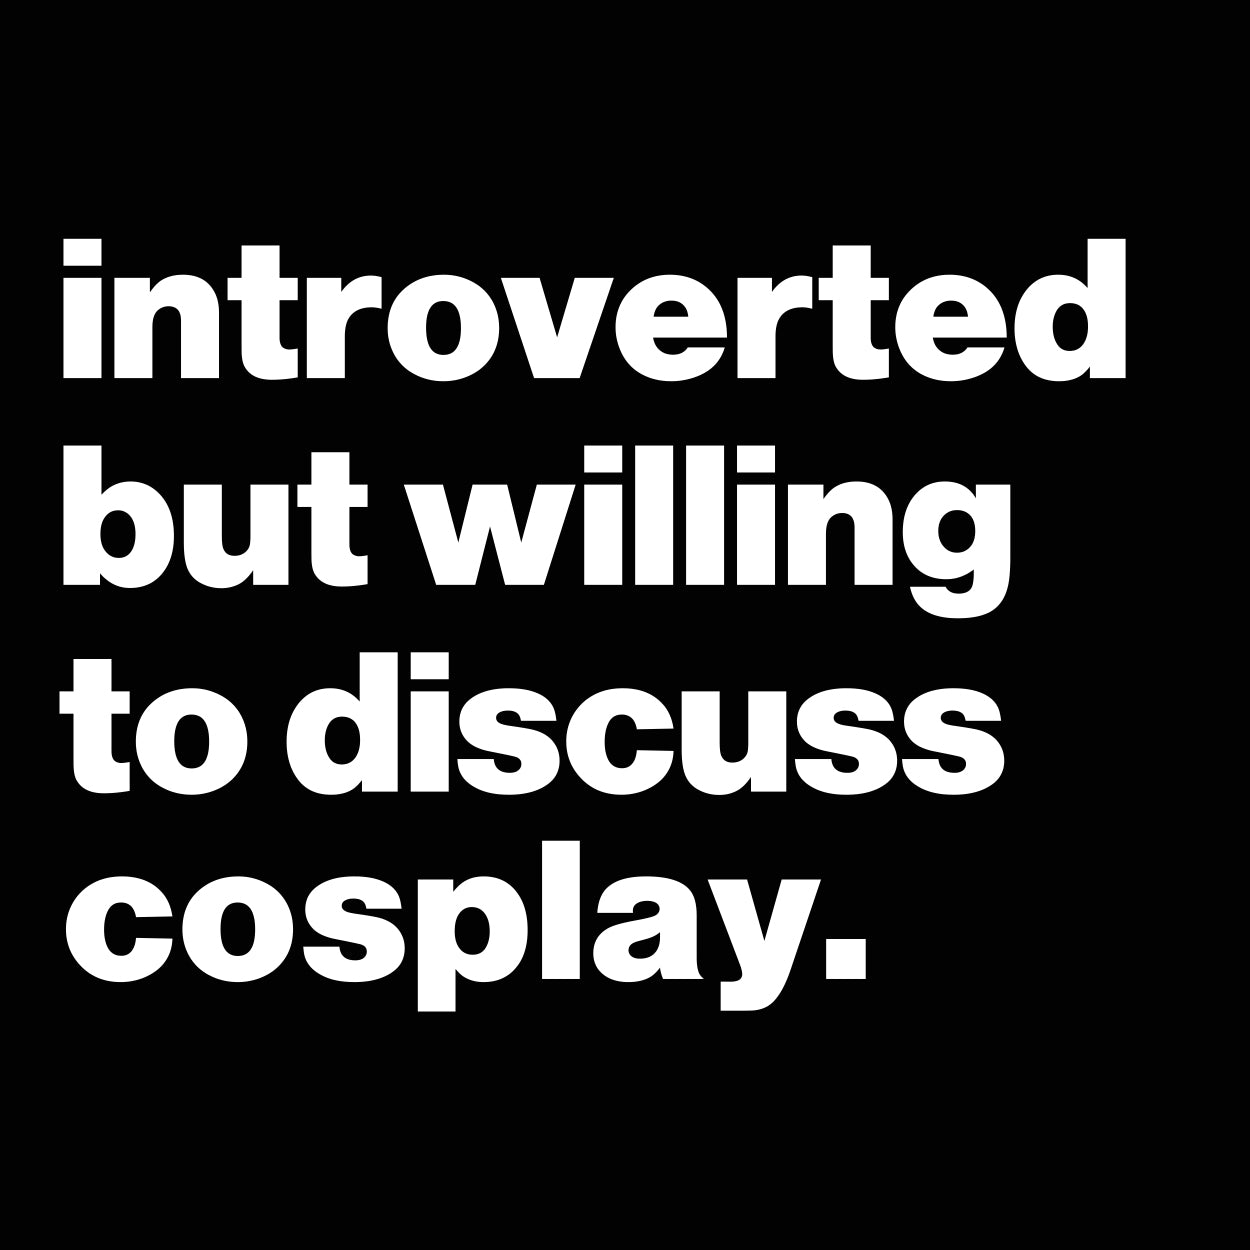 Introverted But Willing To Discuss Cosplay Tshirt - Donkey Tees